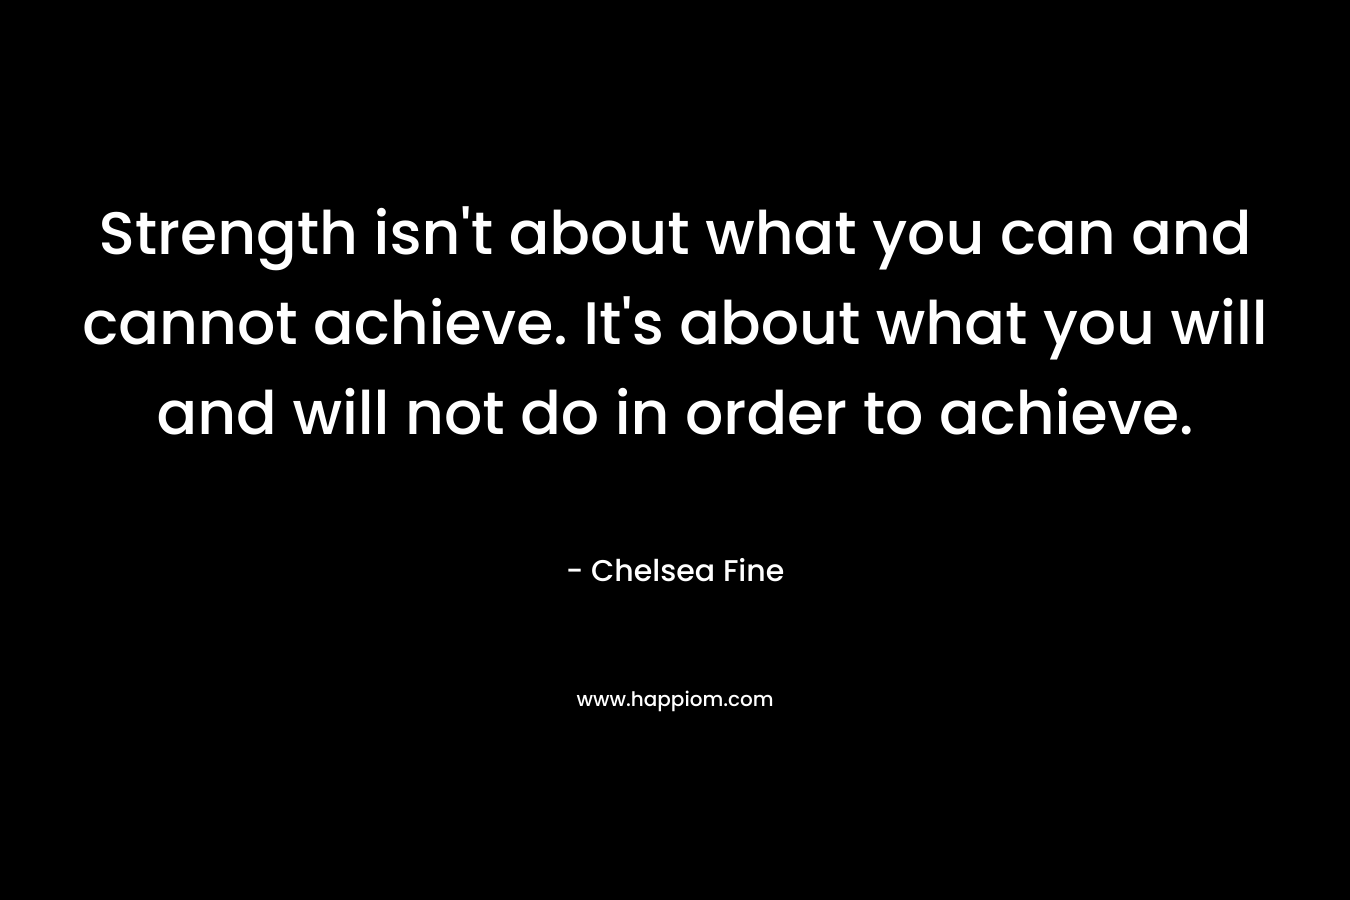 Strength isn't about what you can and cannot achieve. It's about what you will and will not do in order to achieve.